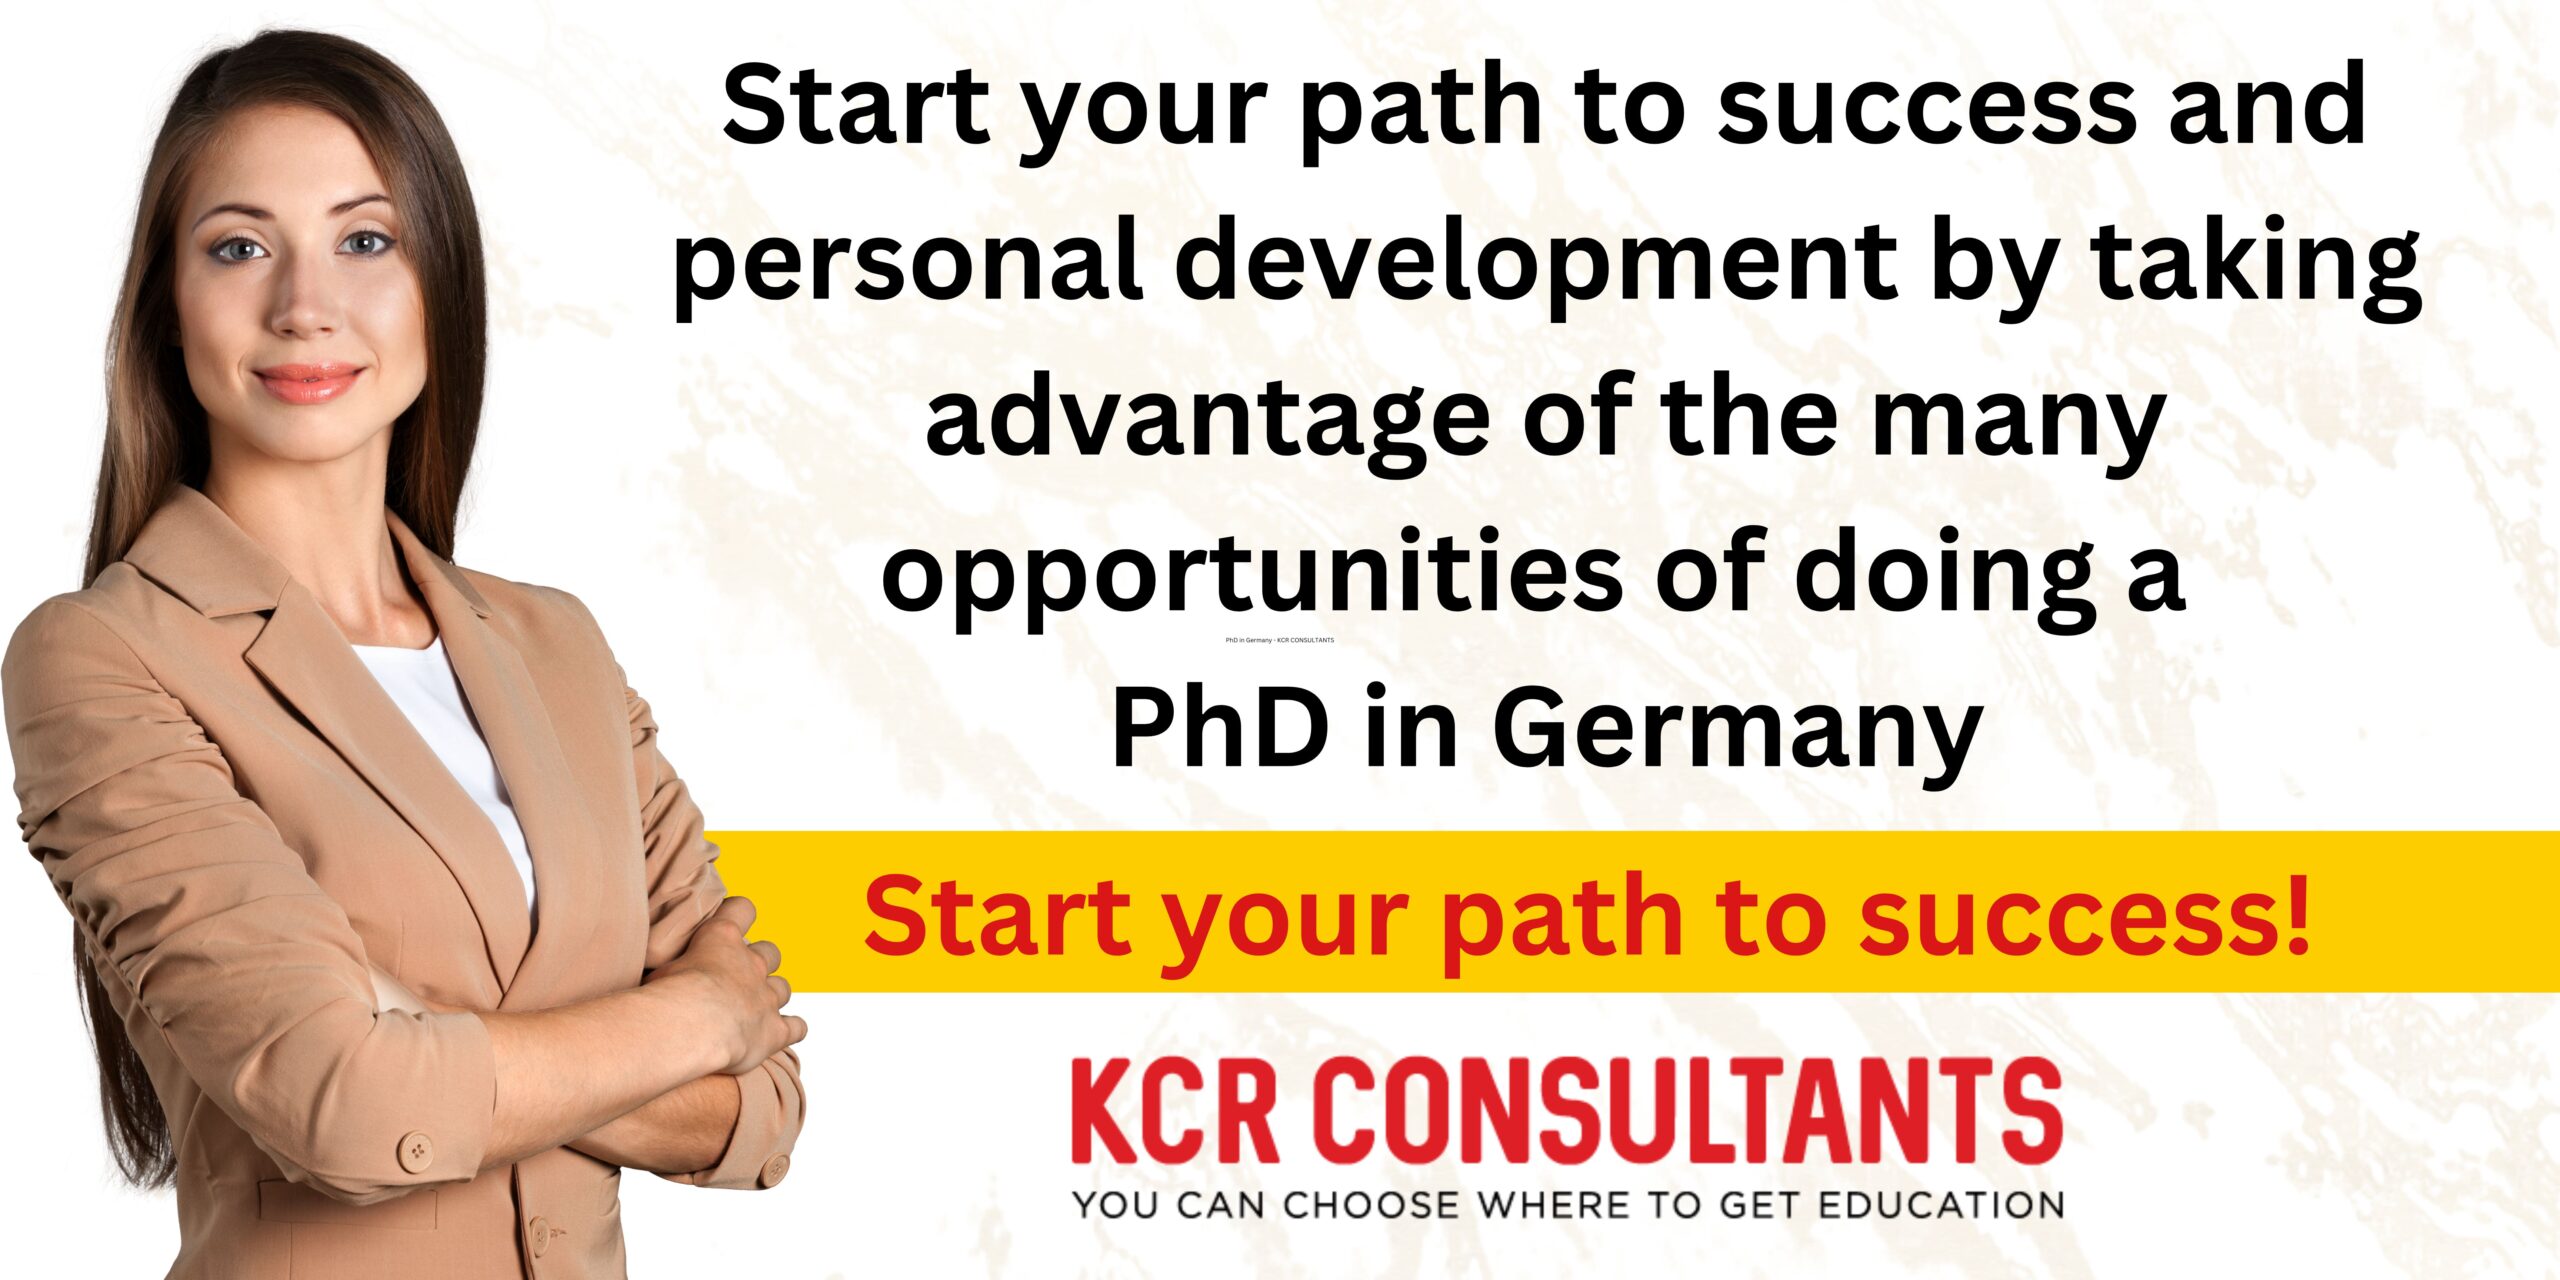 PhD in Germany - KCR CONSULTANTS - Contact us